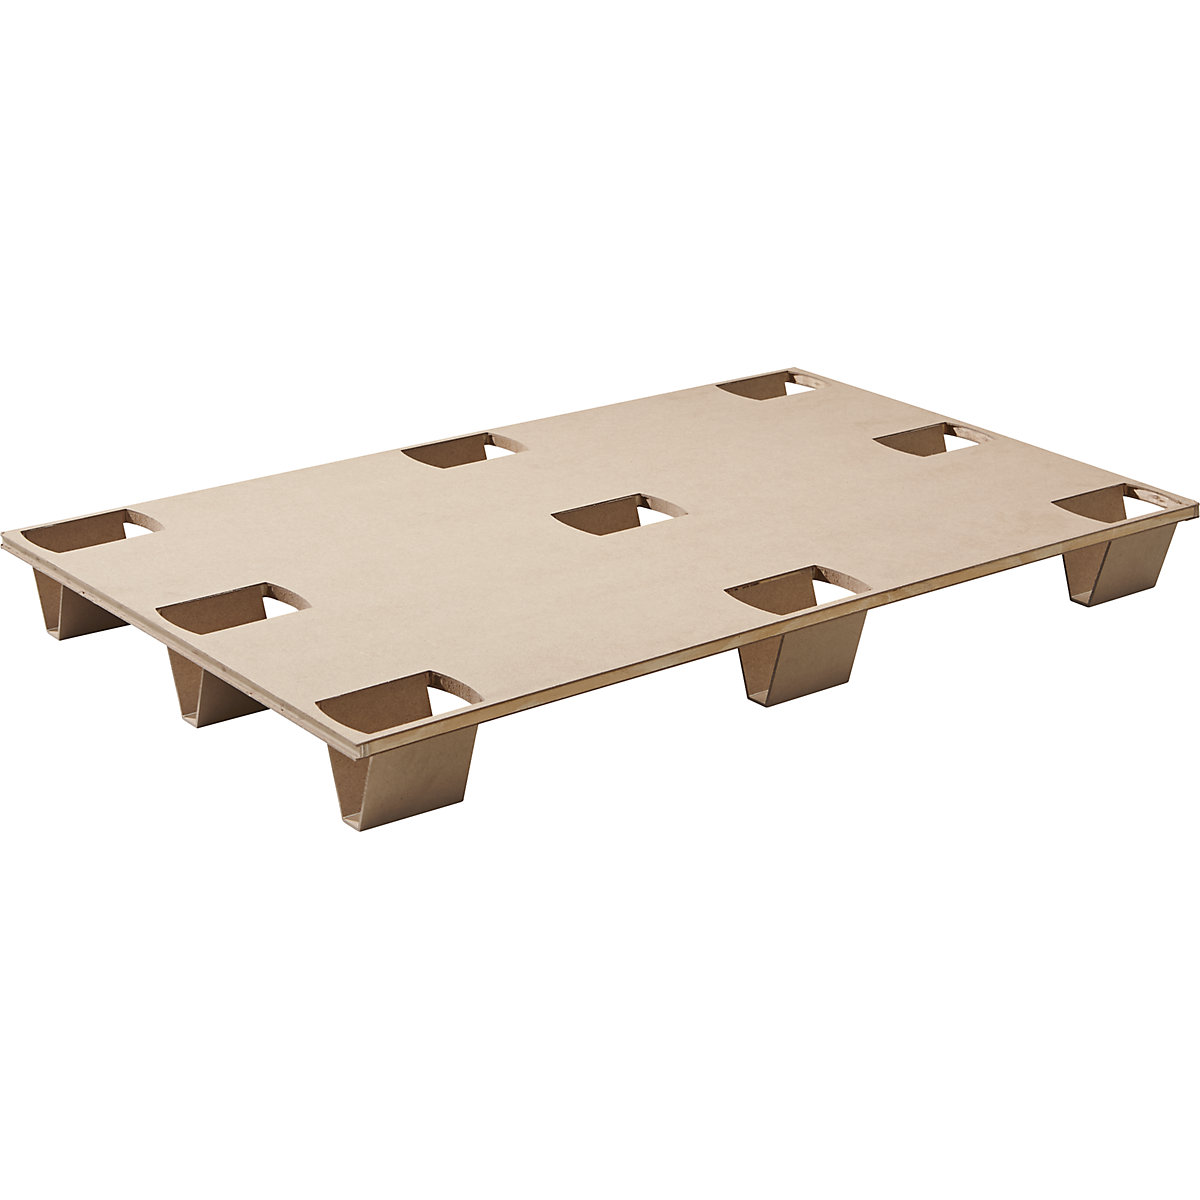 Disposable pallet, pack of 10, made of timber products, 1200 x 800 mm, 5+ packs-1